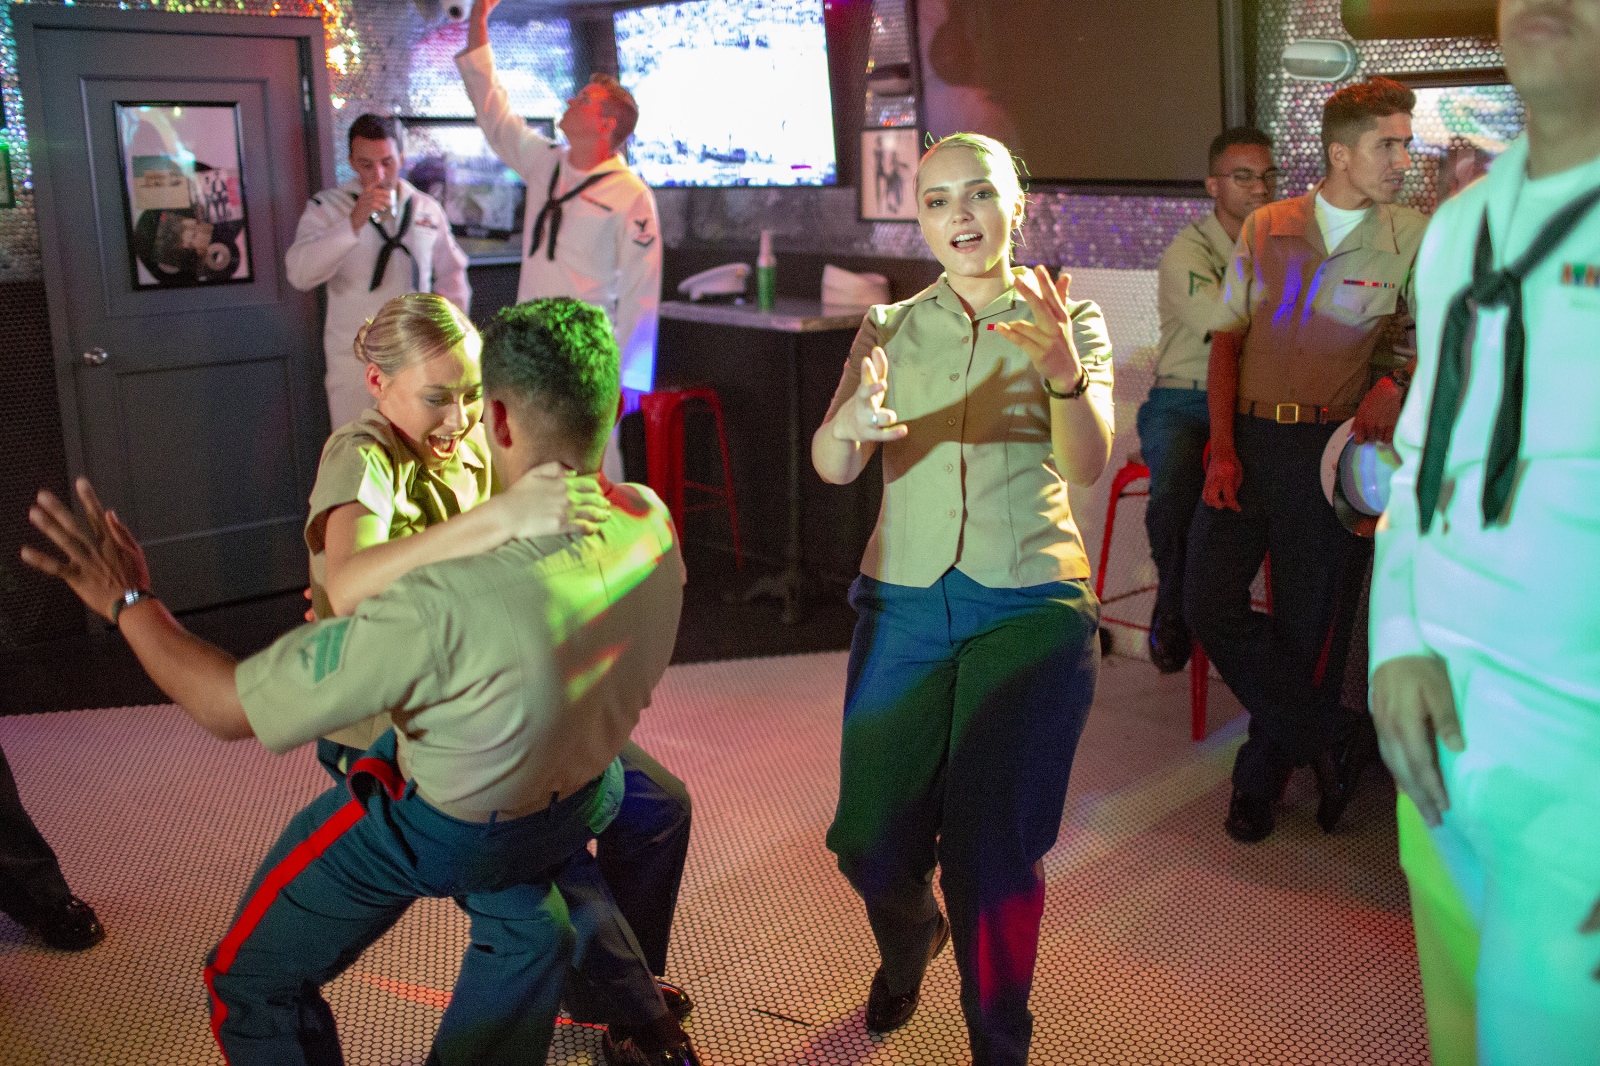  The last night of Fleet Week in New York Cityâ€™s Times Sq. Sailors and Marines party till the curfew until they have to be back onboard ship by 2 AM. May 27, 2018. (Kevin C Downs/Agence Cosmos) 